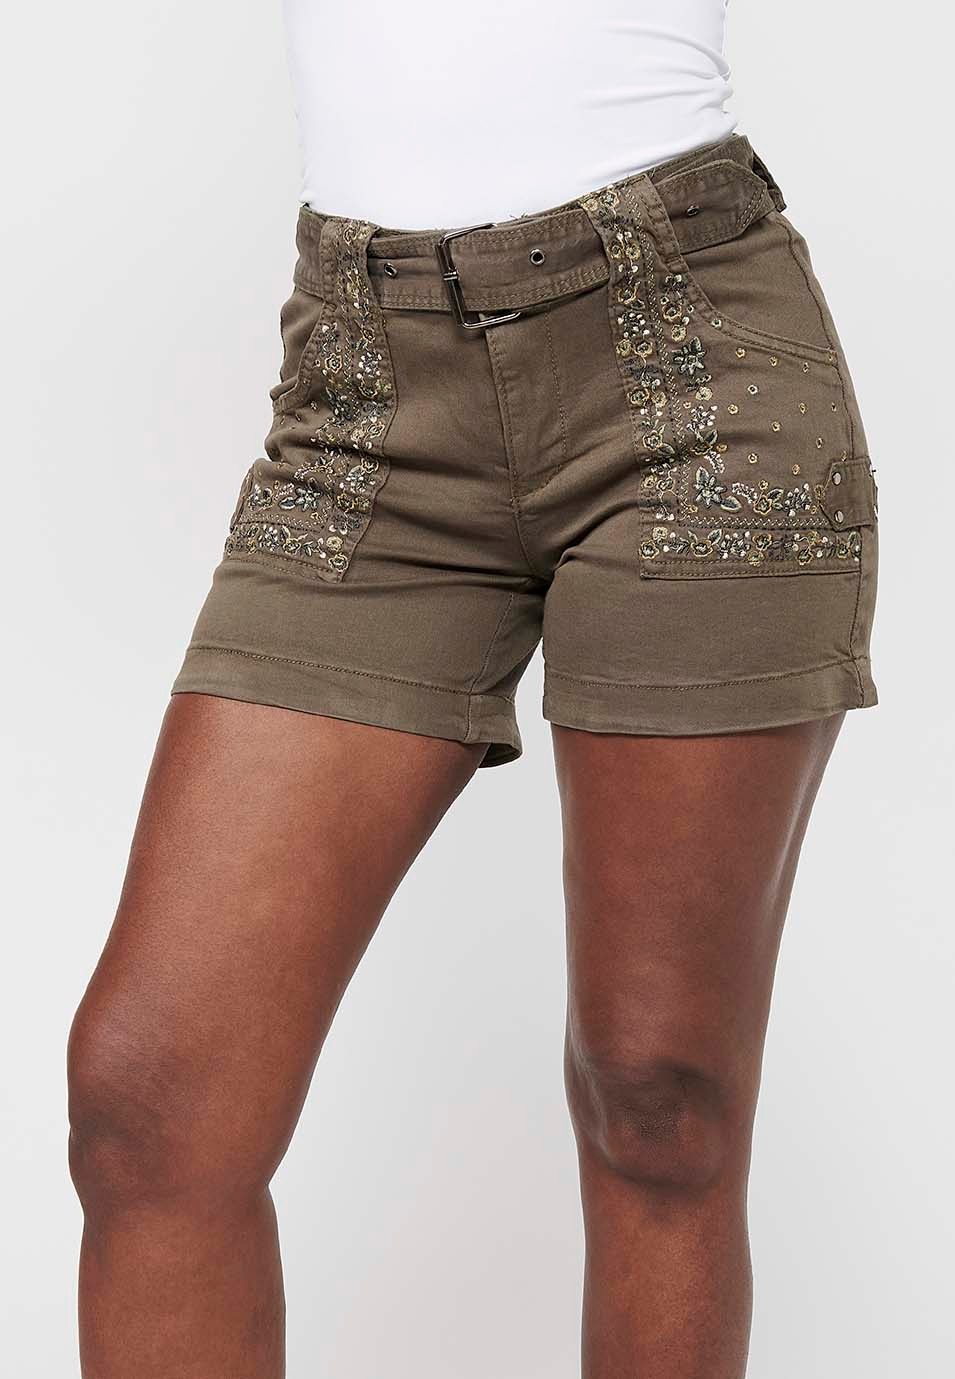 Shorts, pockets with floral embroidery. Adjustable waistband with belt, khaki color for women